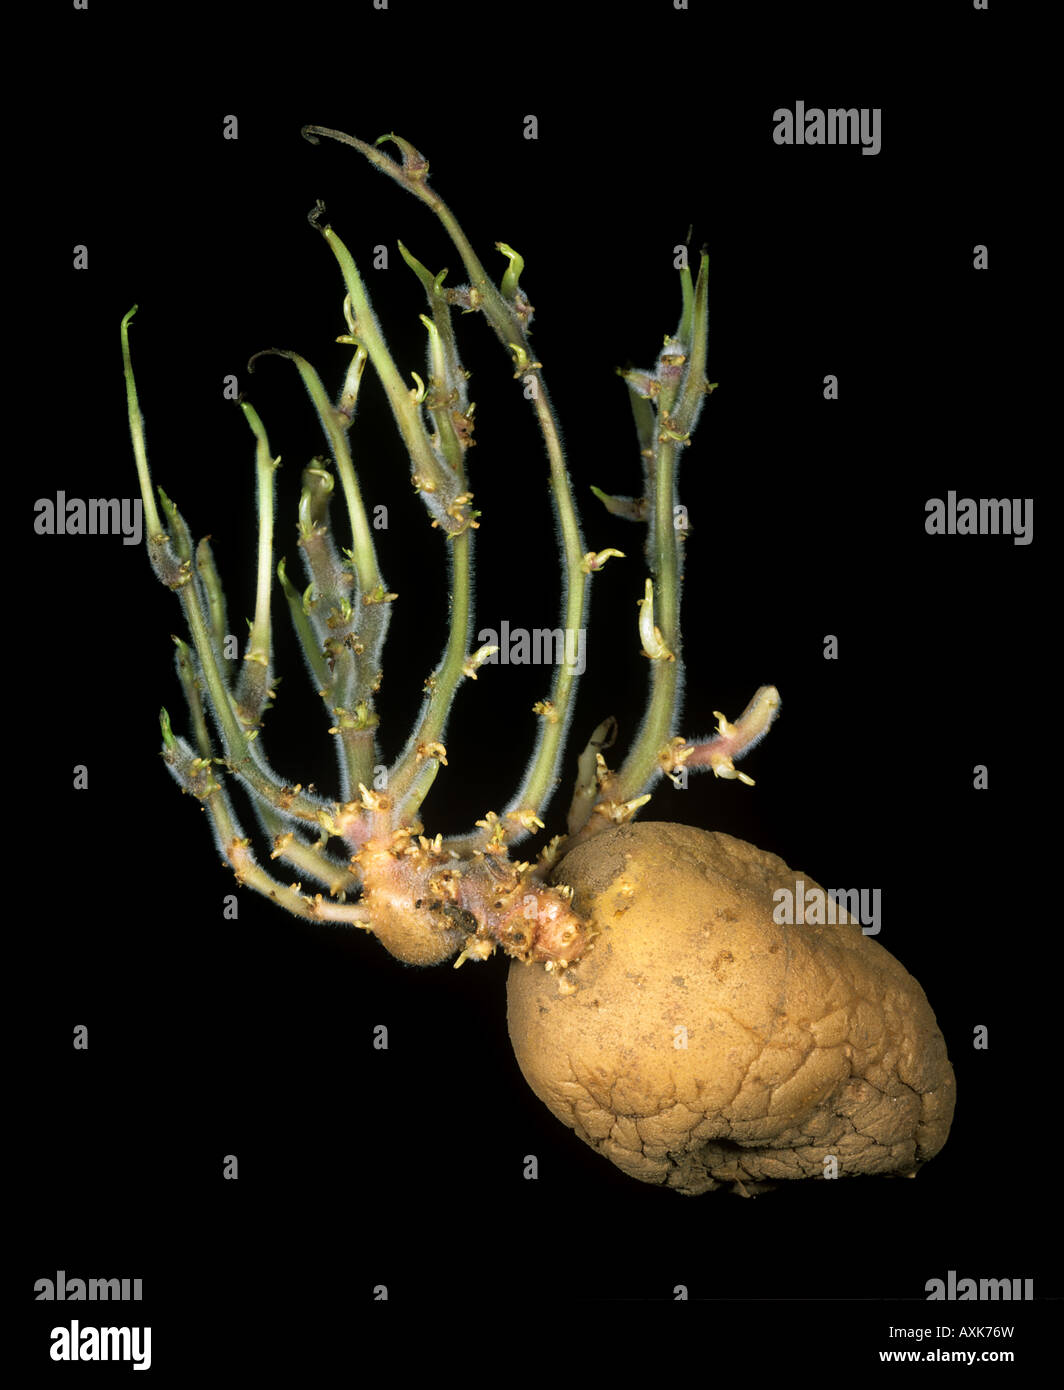 Architecture structure of shoots arising from a potato tuber Stock Photo